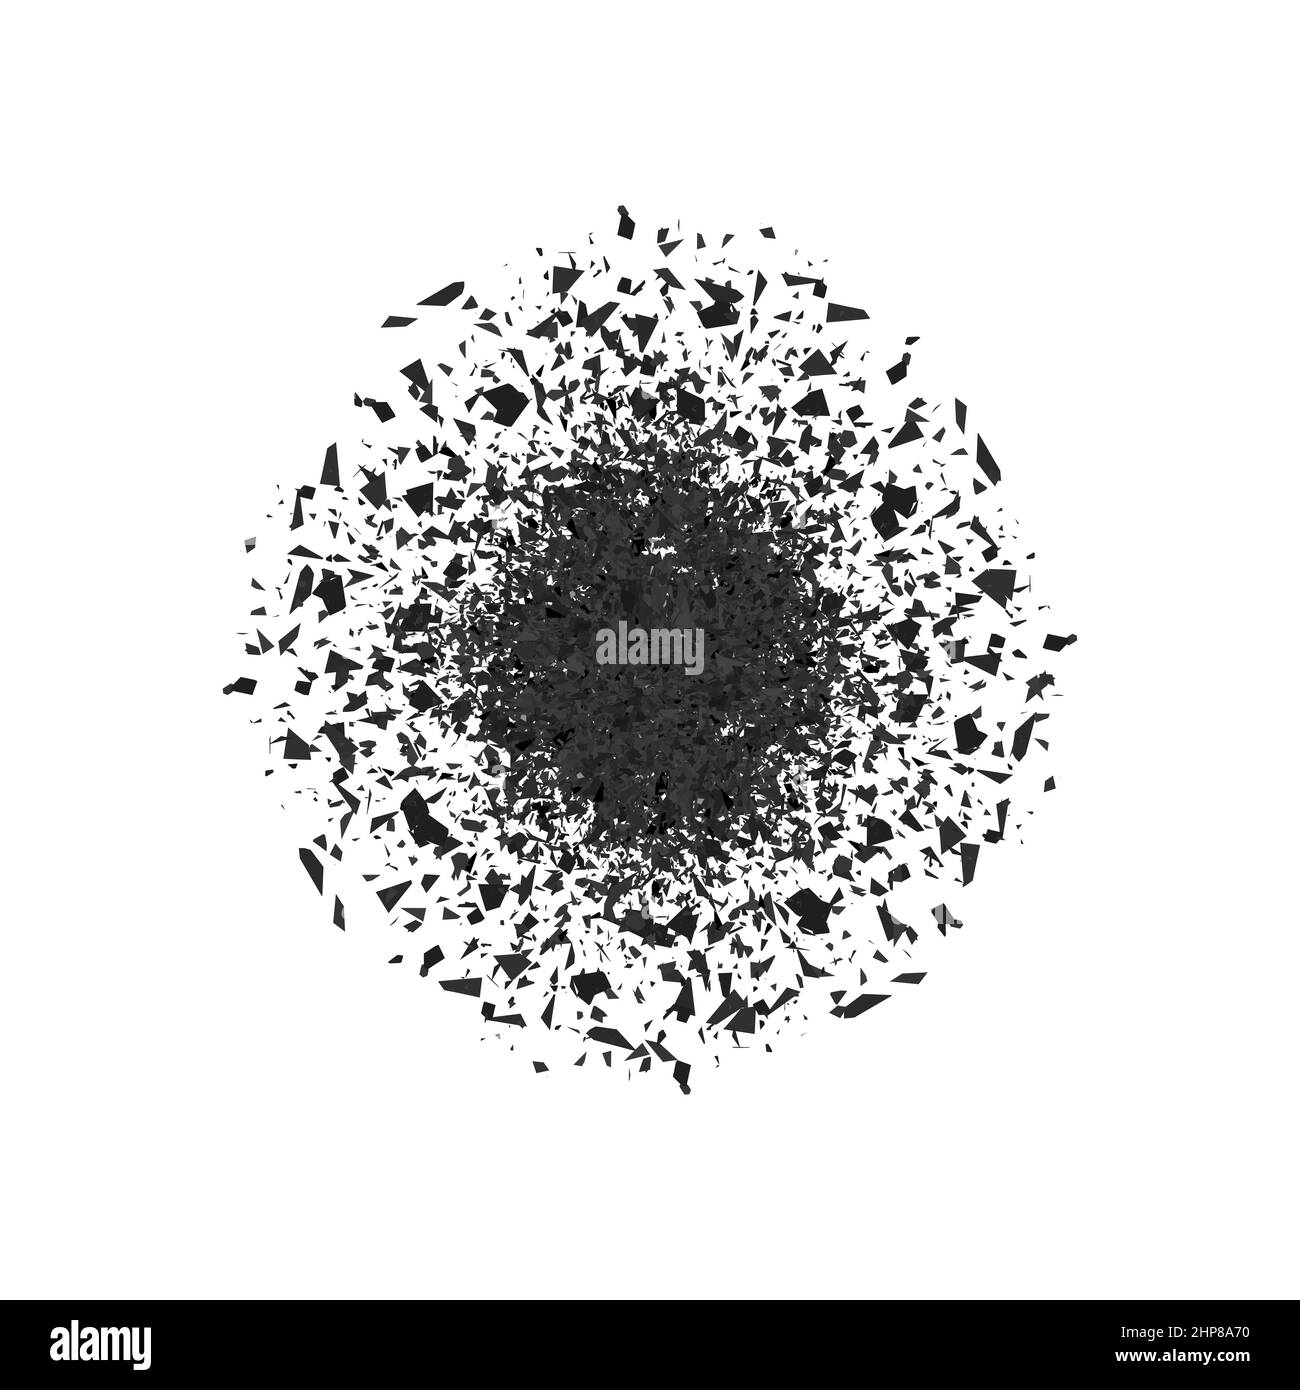 Explosion Cloud of Black Pieces on Gray Background. Sharp Particles Randomly Fly in the Air. Big Explosion. Stock Vector